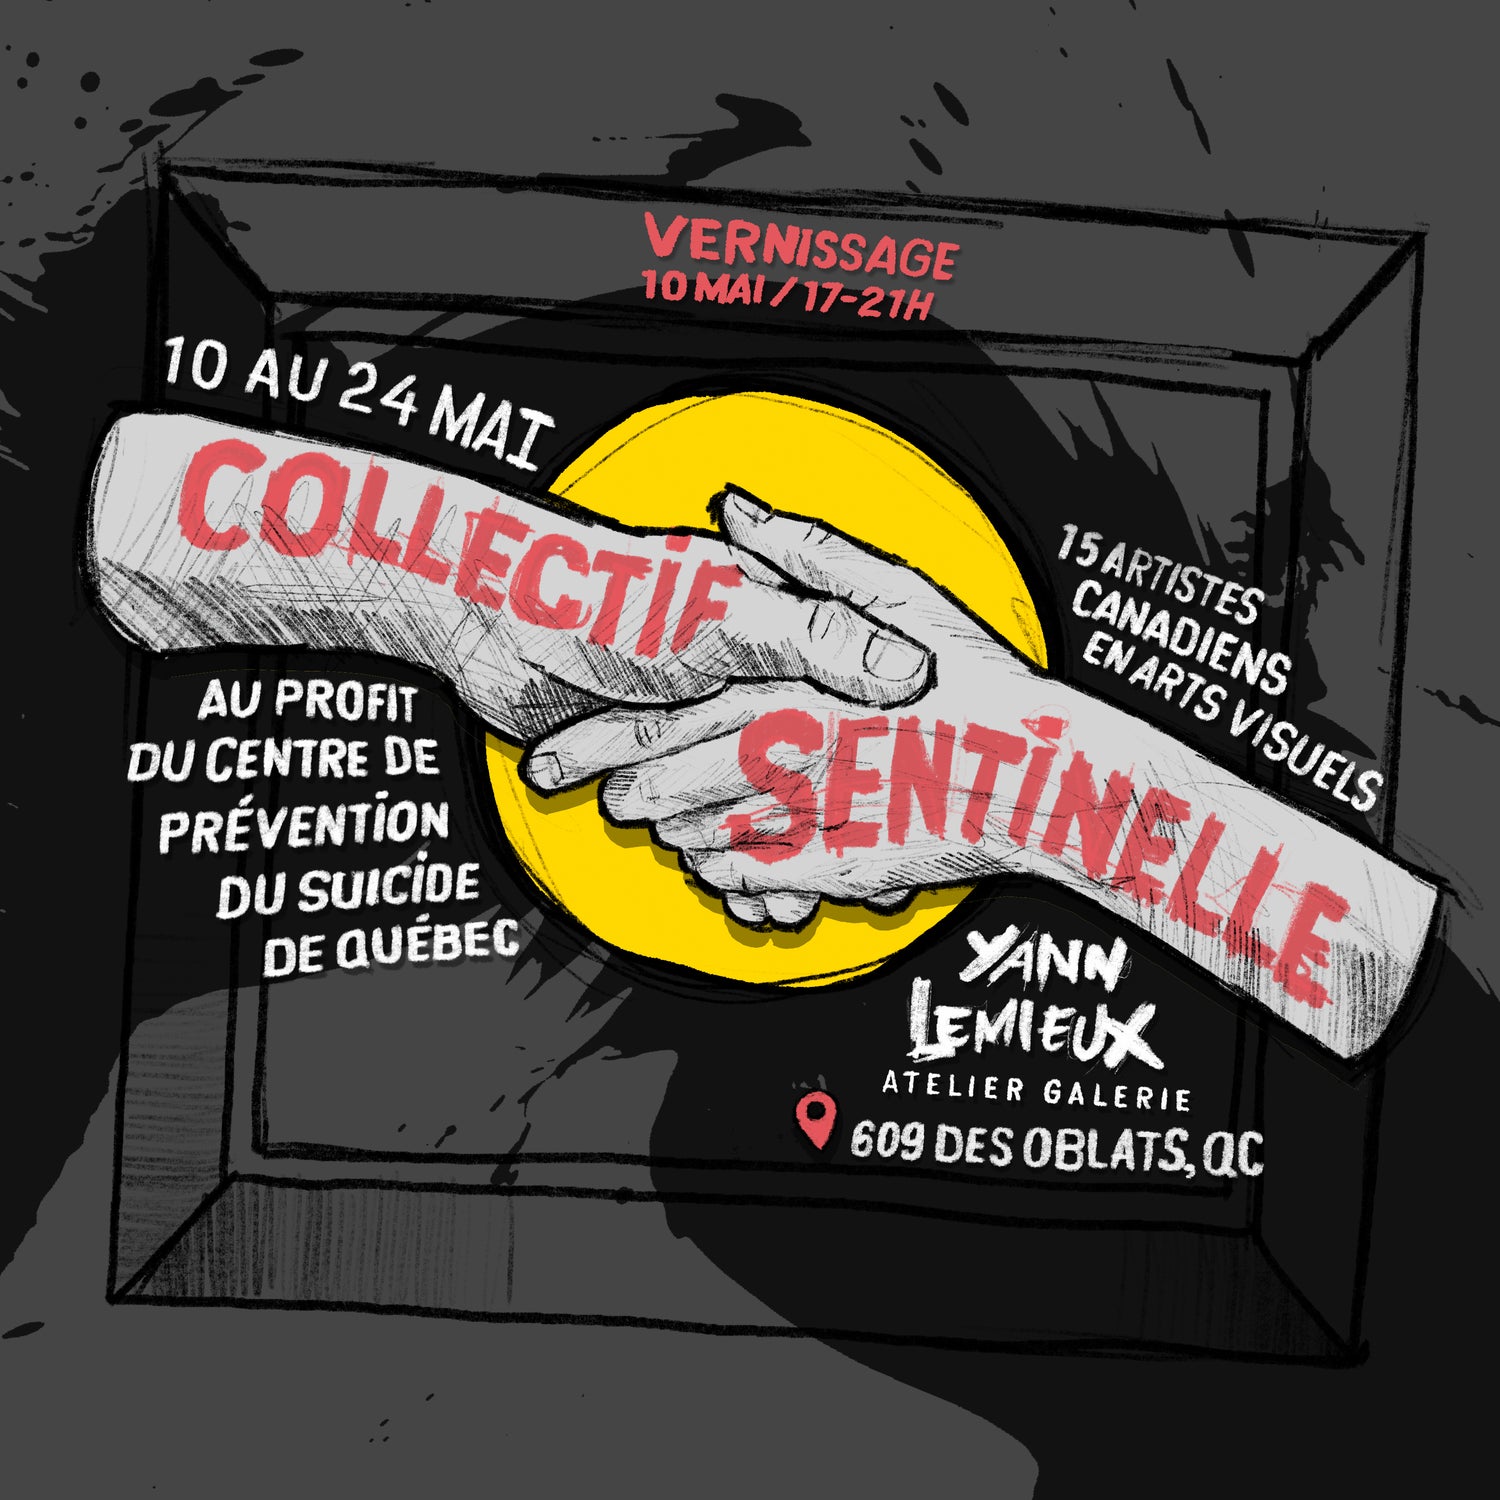 Collectif Sentinelle